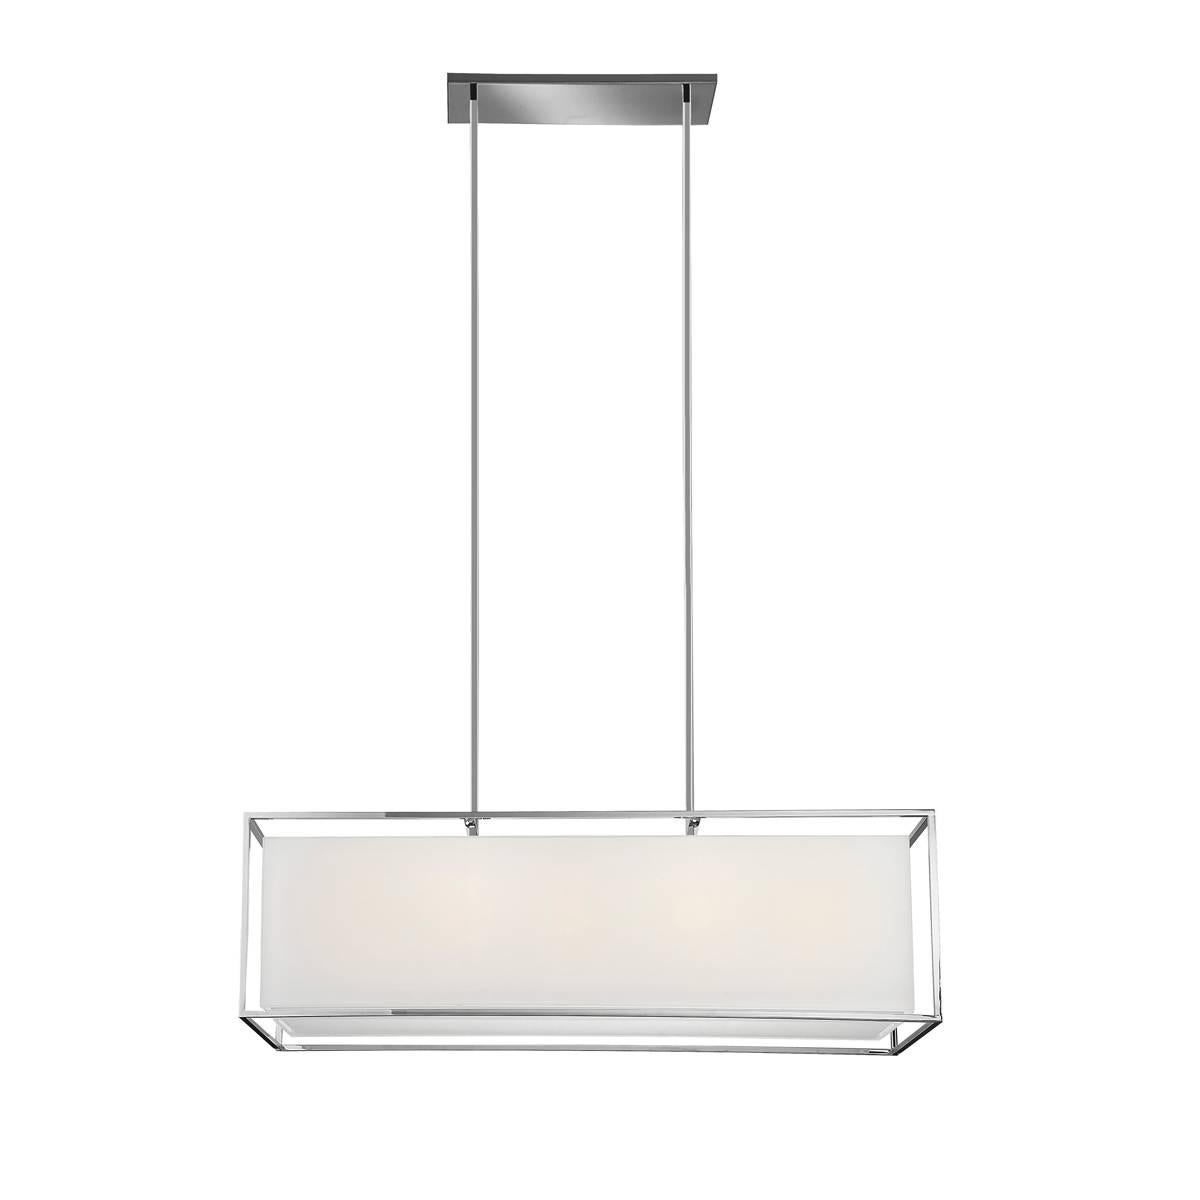 Part of the Square collection, this rectangular ceiling lamp will be a perfect addition to a modern dining room or entryway and can be arranged with other pieces from the same series for a cohesive effect. The brass structure has an elegant chrome